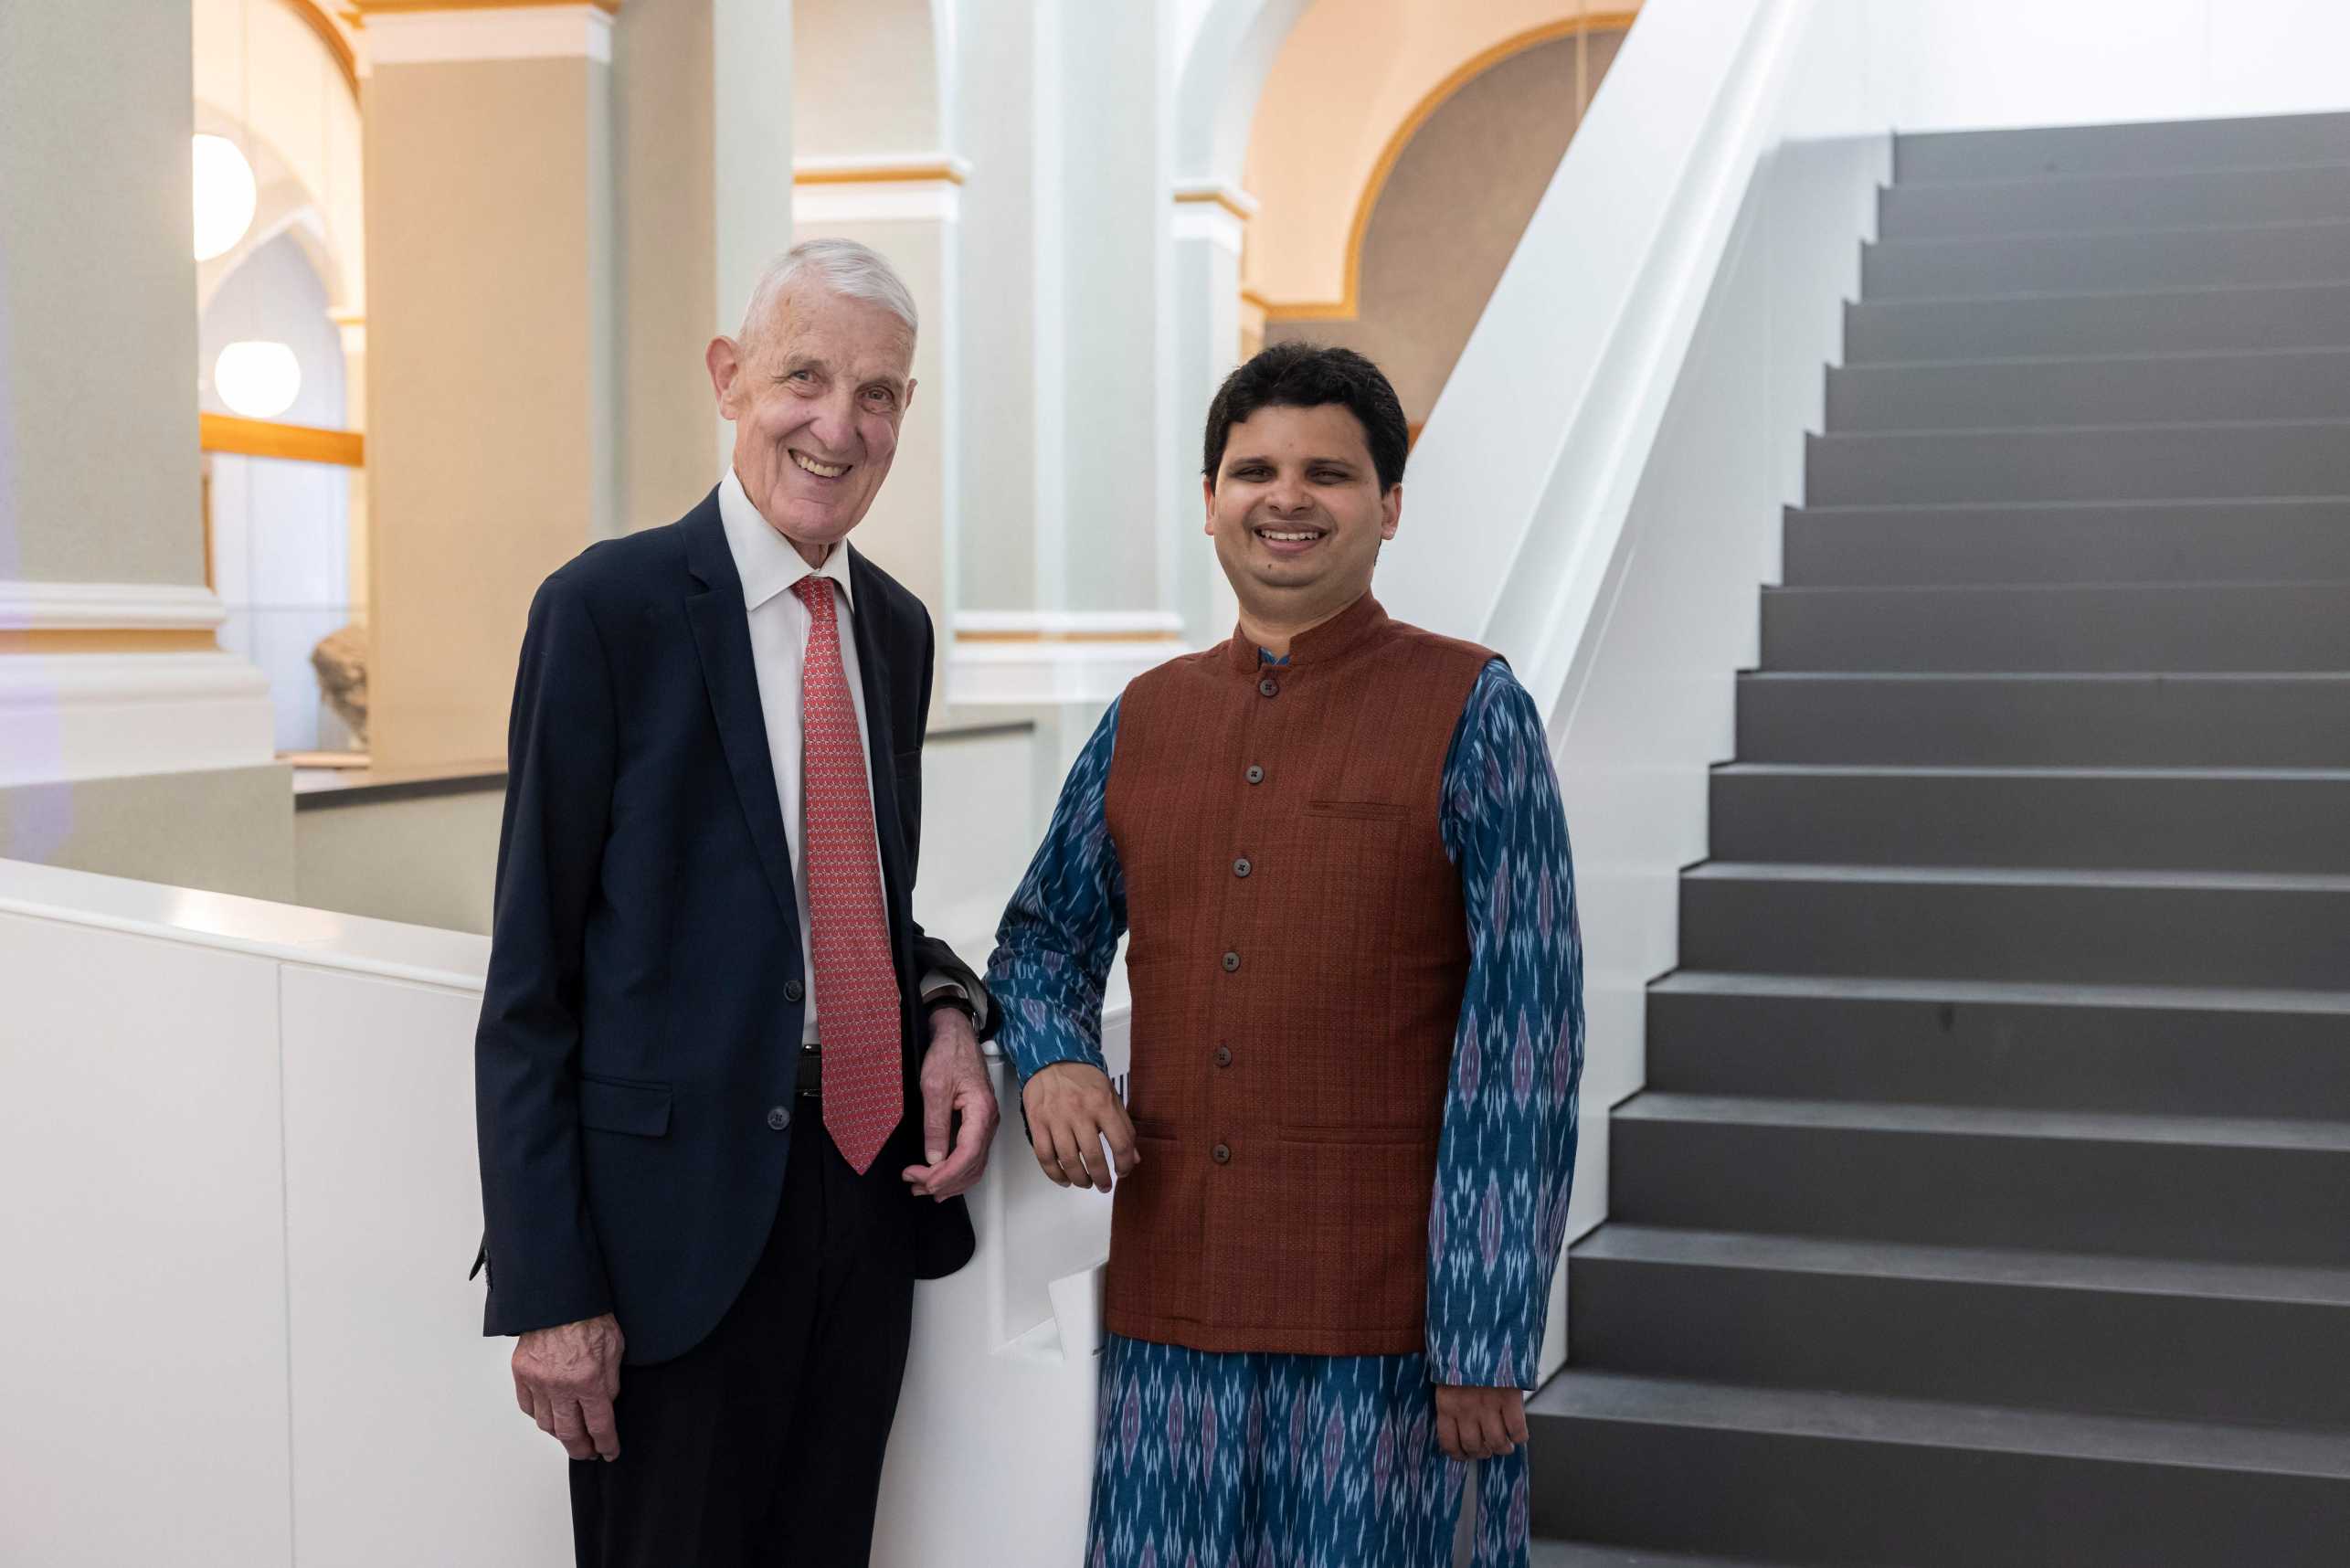 Max Rössler stands next to Siddhartha Mishra in front of a staircase in the ETH building.